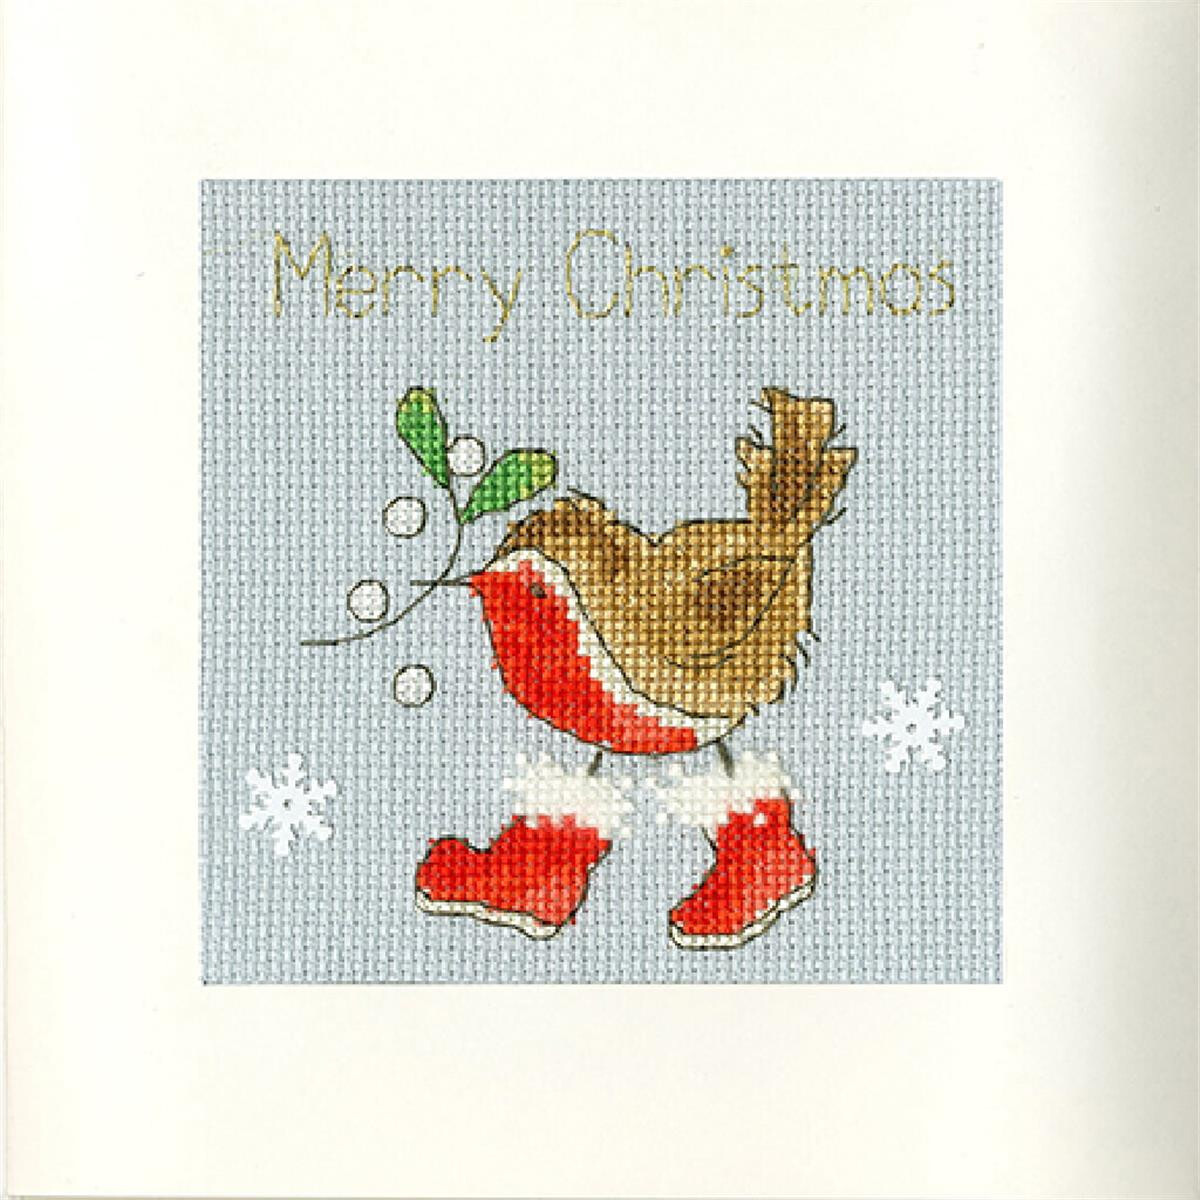 This charming embroidery pack from Bothy Threads features...